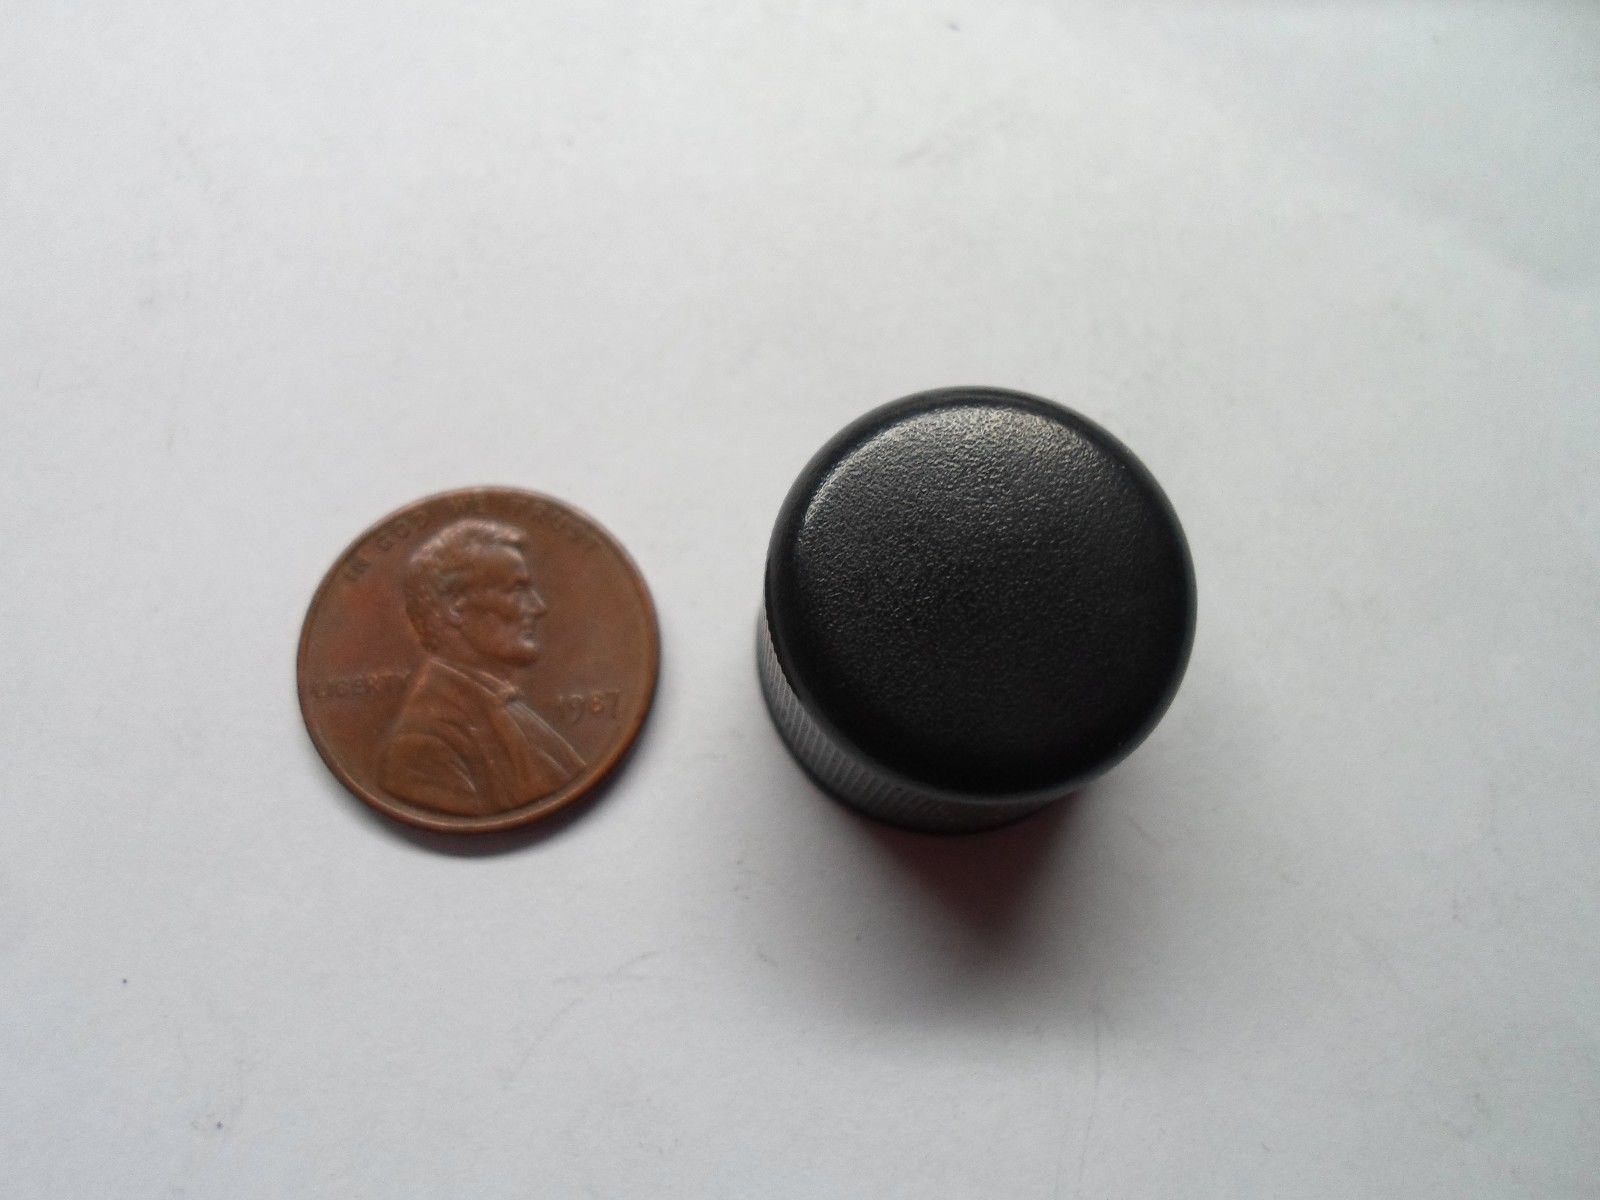 2000 FORD WINDSTAR STEREO TUNER RADIO KNOB  OEM FACTORY FREE SHIPPING!